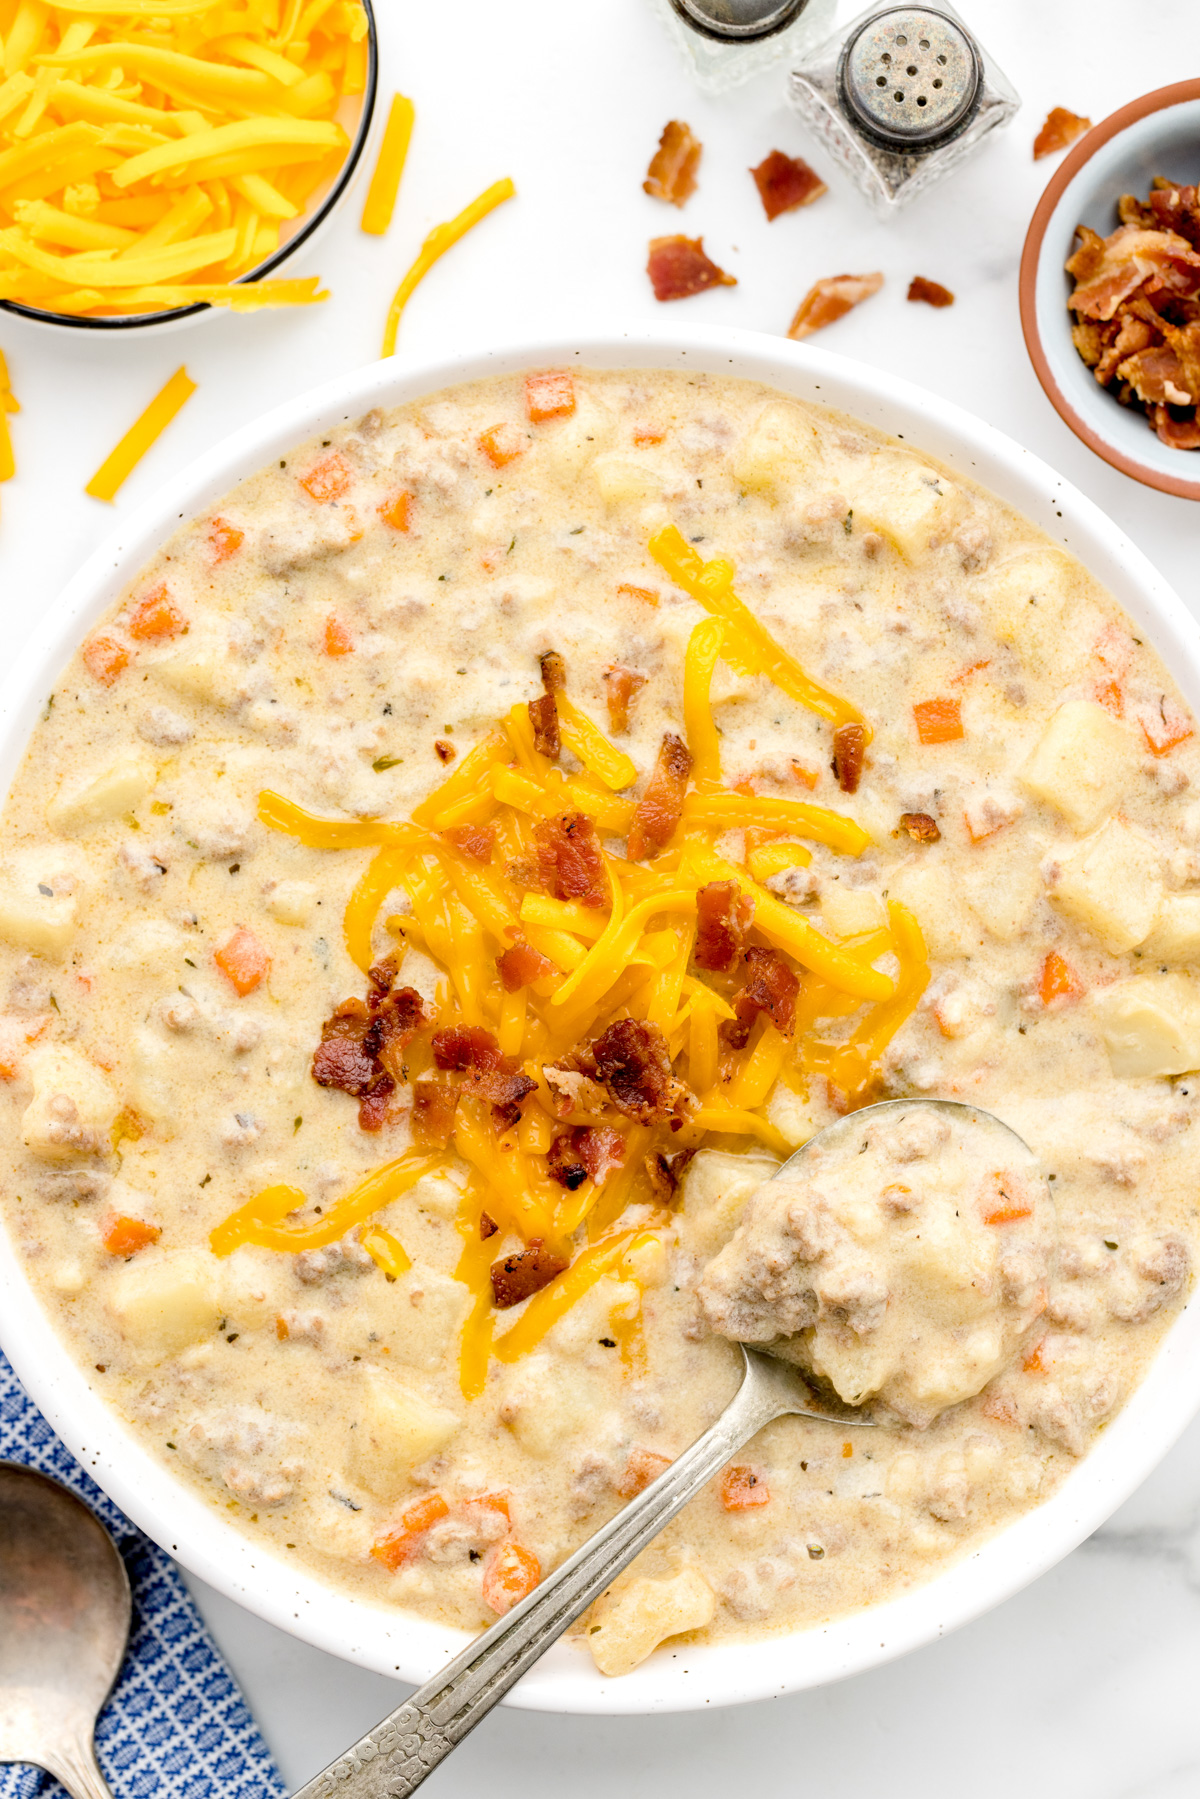 A bowl of cheeseburger soup topped with cheeese and bacon crumbles.